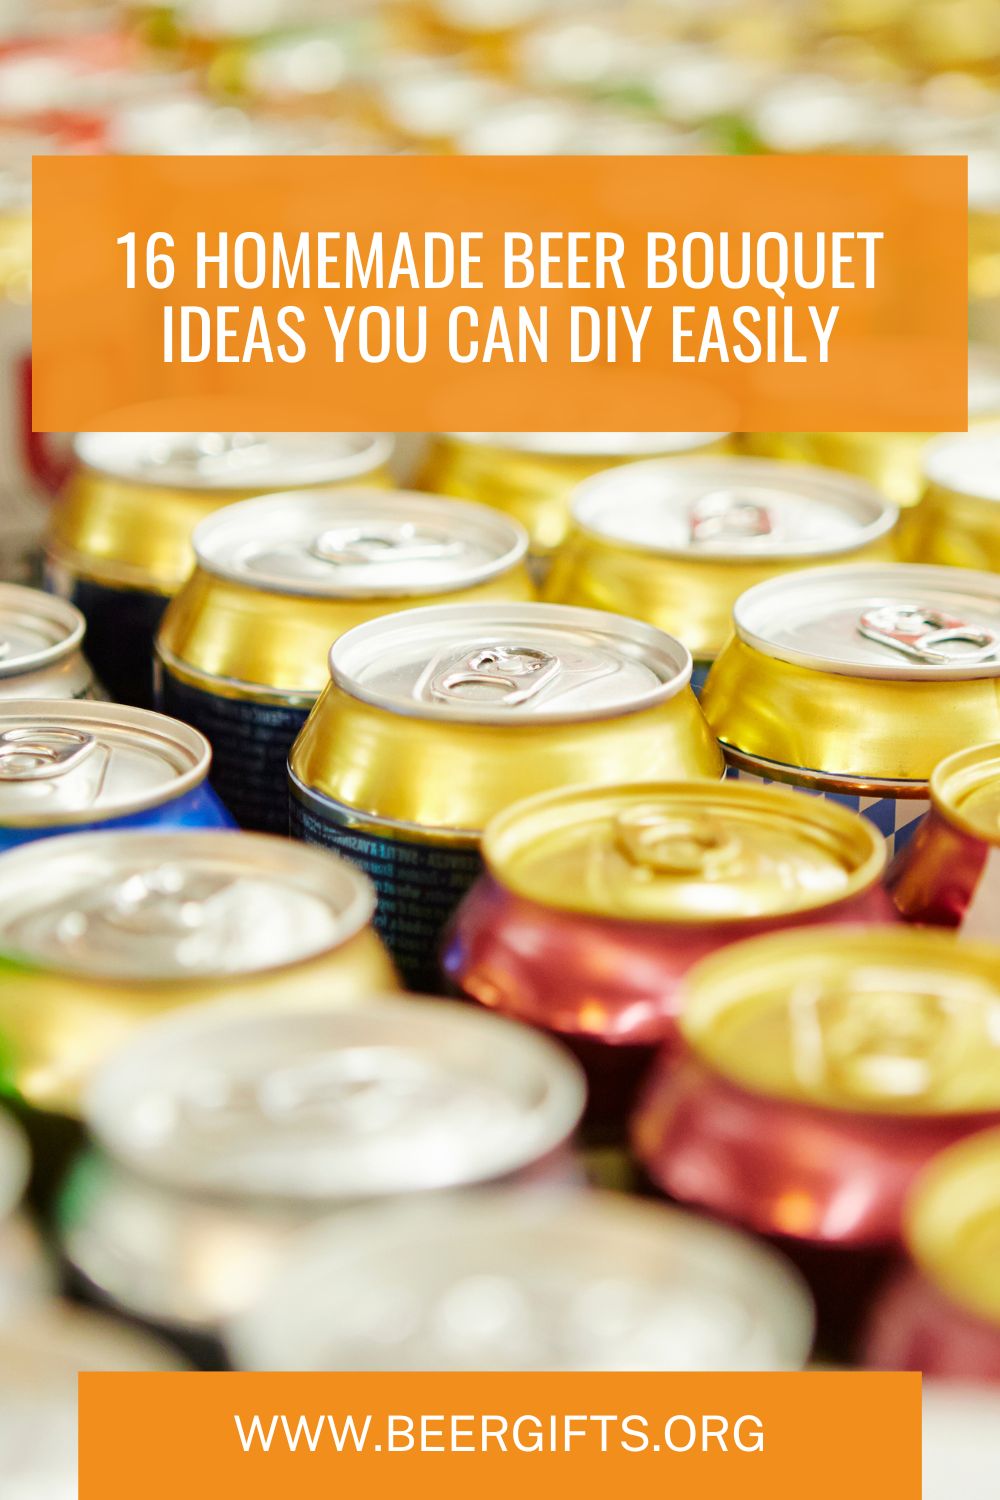 16 Homemade Beer Bouquet Ideas You Can DIY Easily8